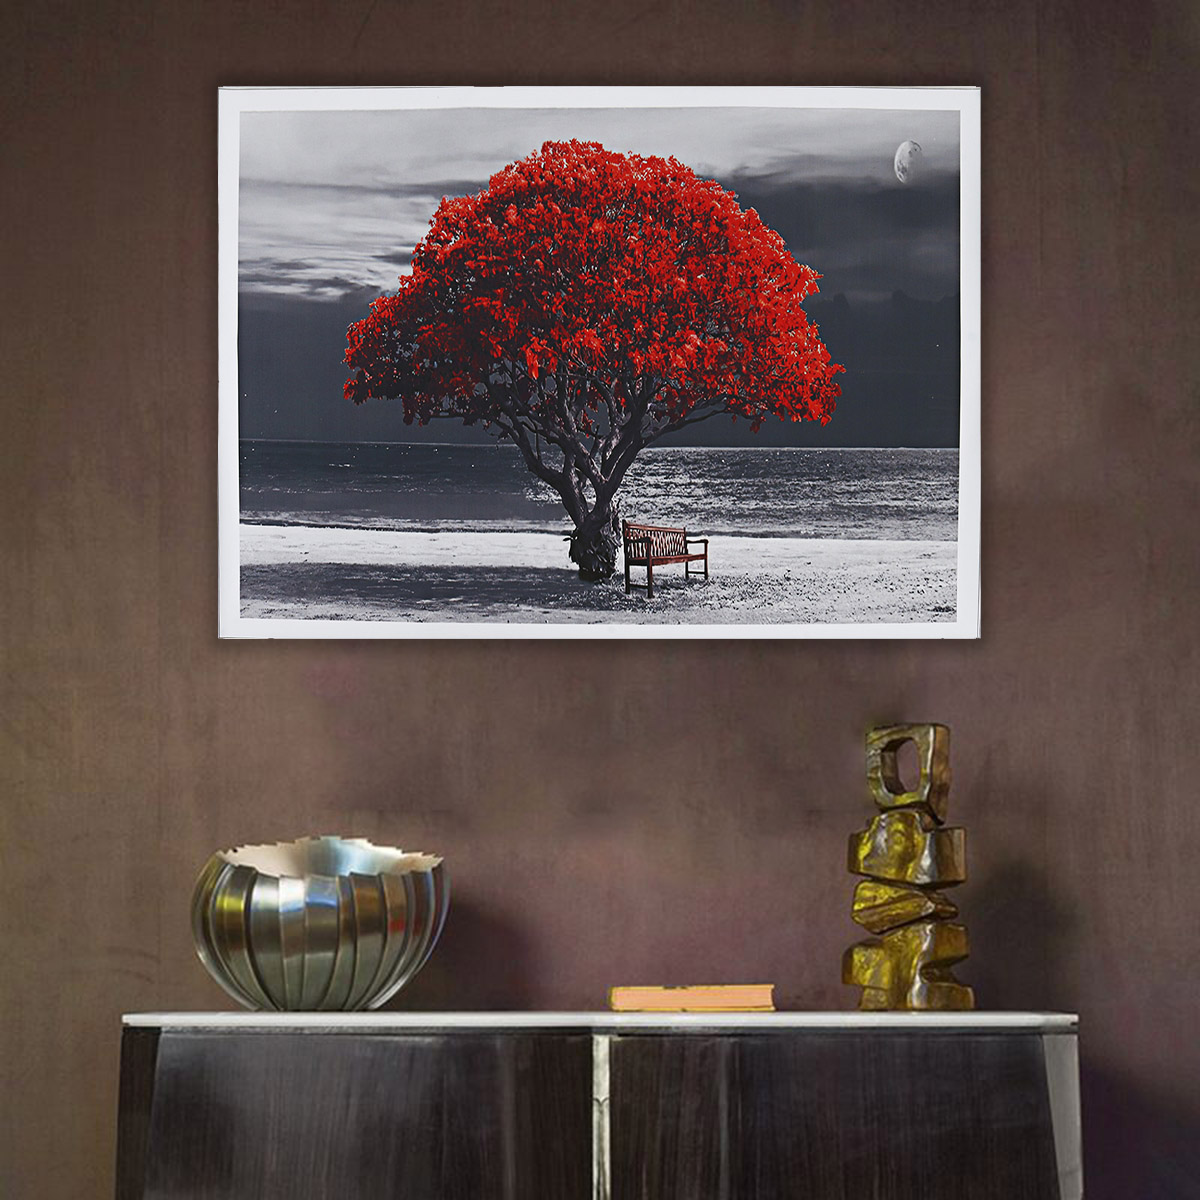 1-Piece-Big-Tree-Canvas-Painting-Wall-Decorative-Print-Art-Picture-Unframed-Wall-Hanging-Home-Office-1785043-14